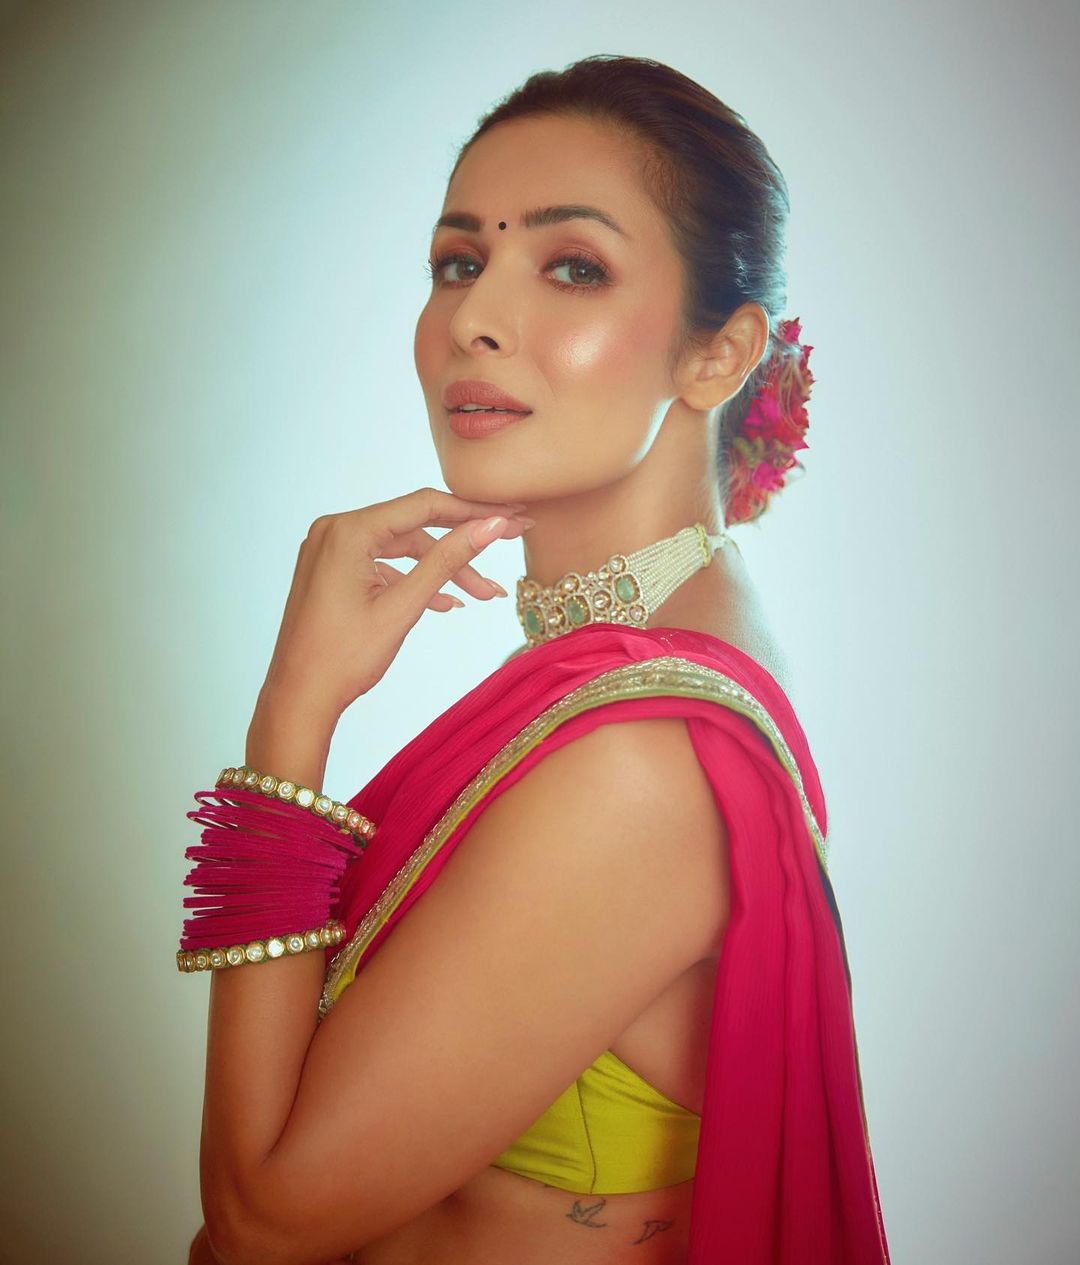 Malaika Arora accessorises her ethnic look with a diamond choker and pink bangles on just one wrist